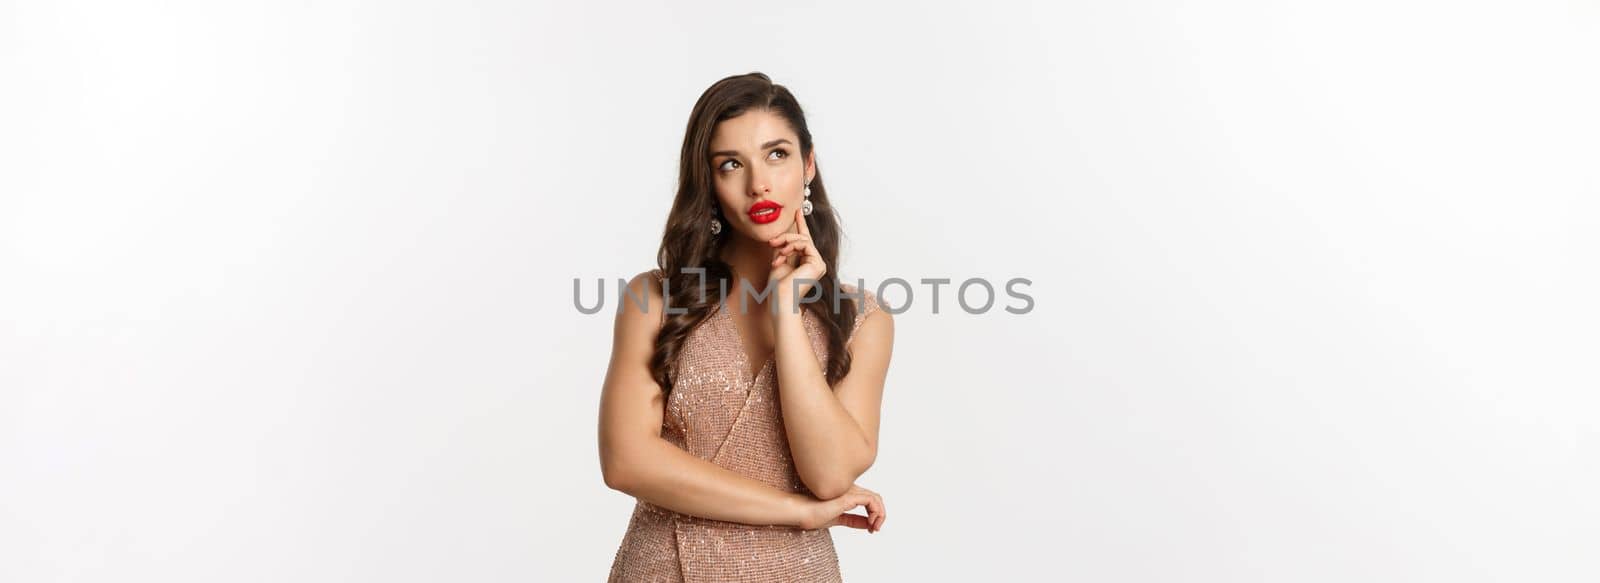 Christmas, holidays and celebration concept. Young woman looking thoughtful at upper left corner, wearing evening dress for party, thinking about New Year eve, white background.